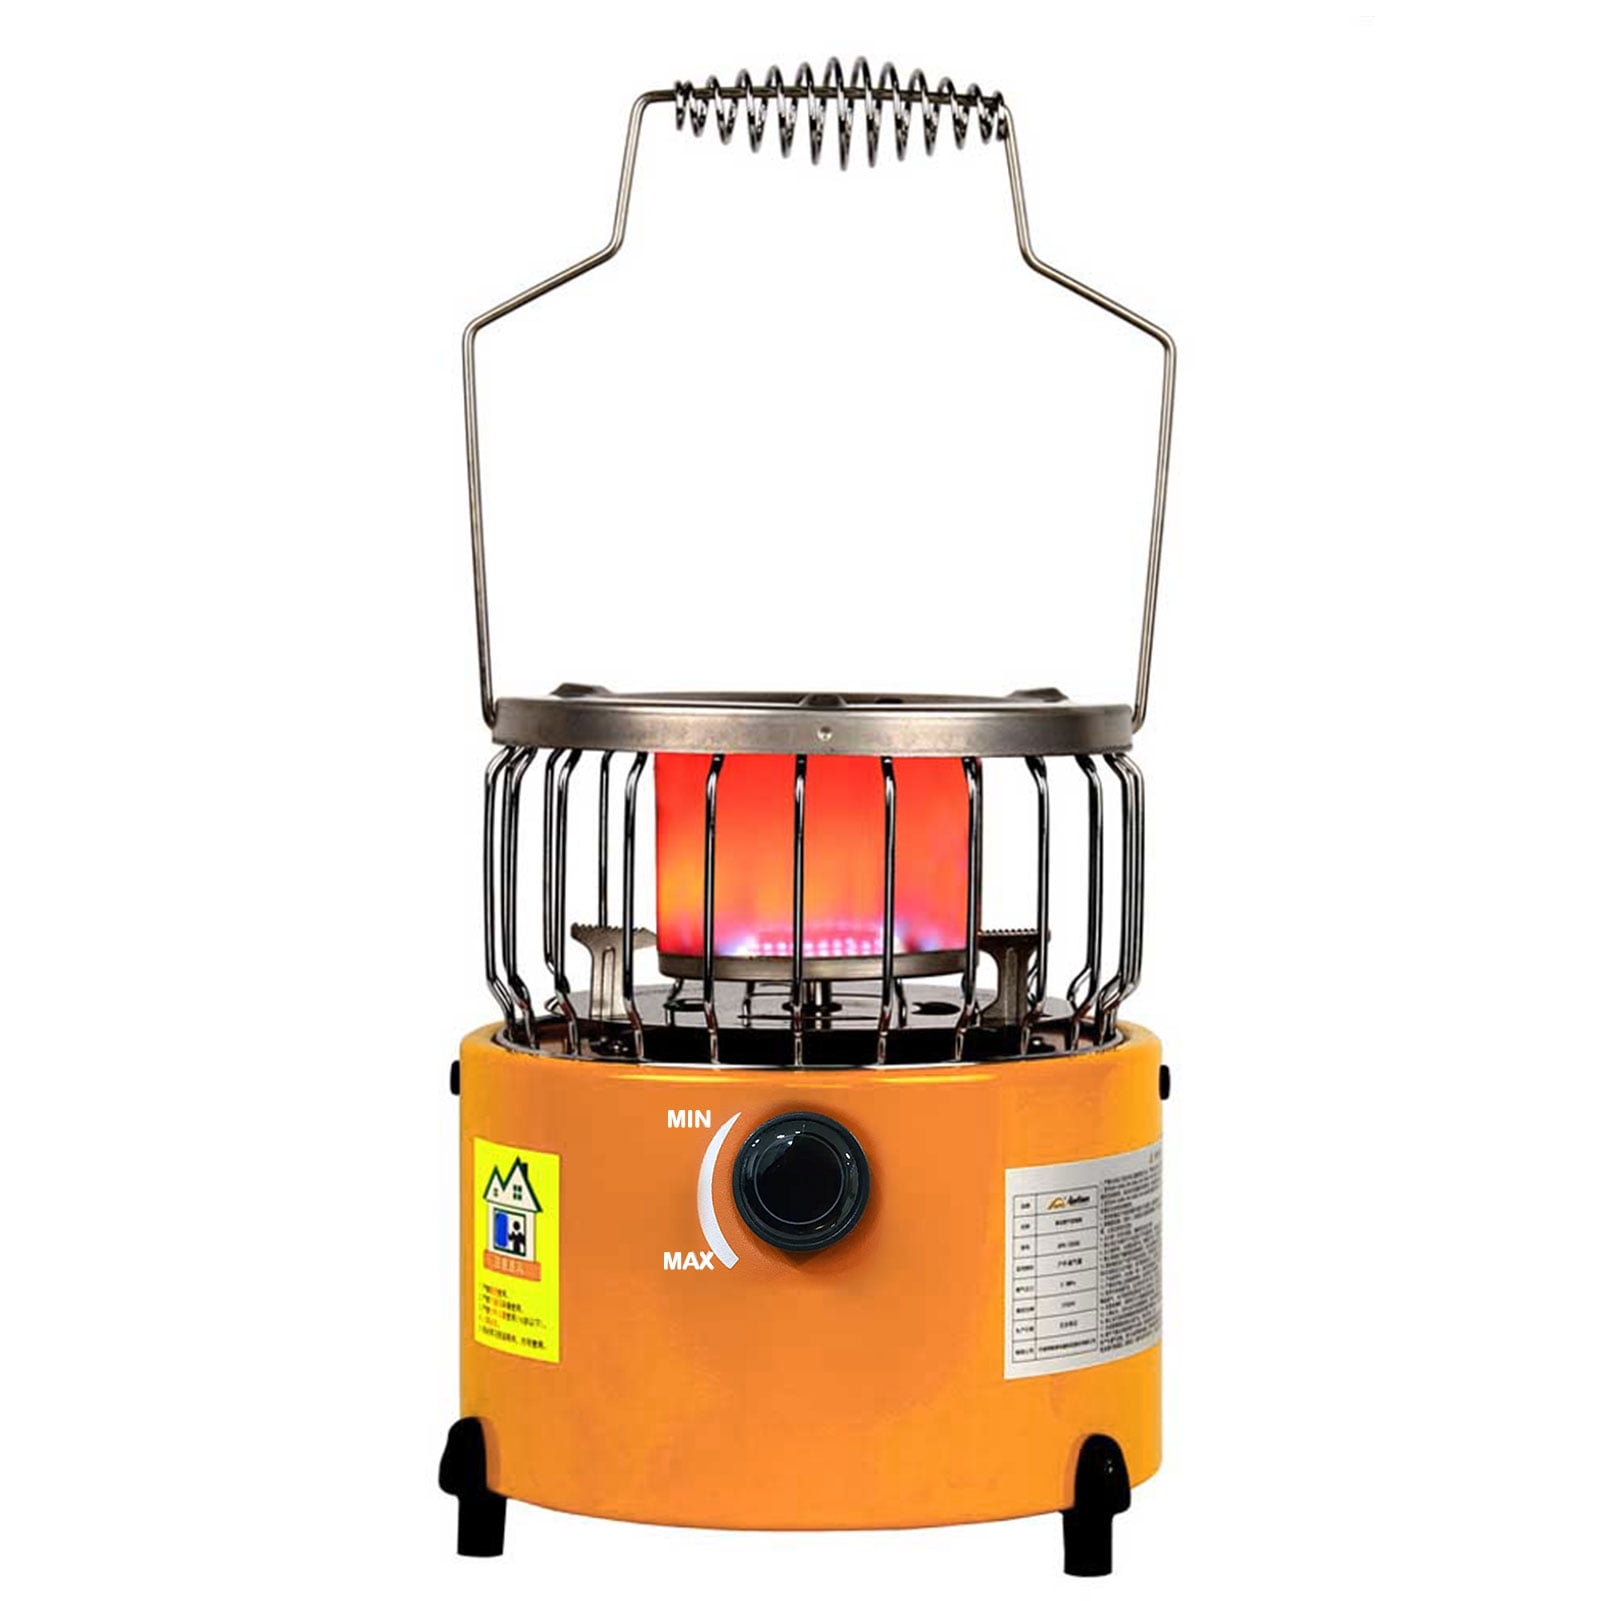 Outdoor Portable Gas Heater Warmer Stove Heating Cover tent heater X1R9